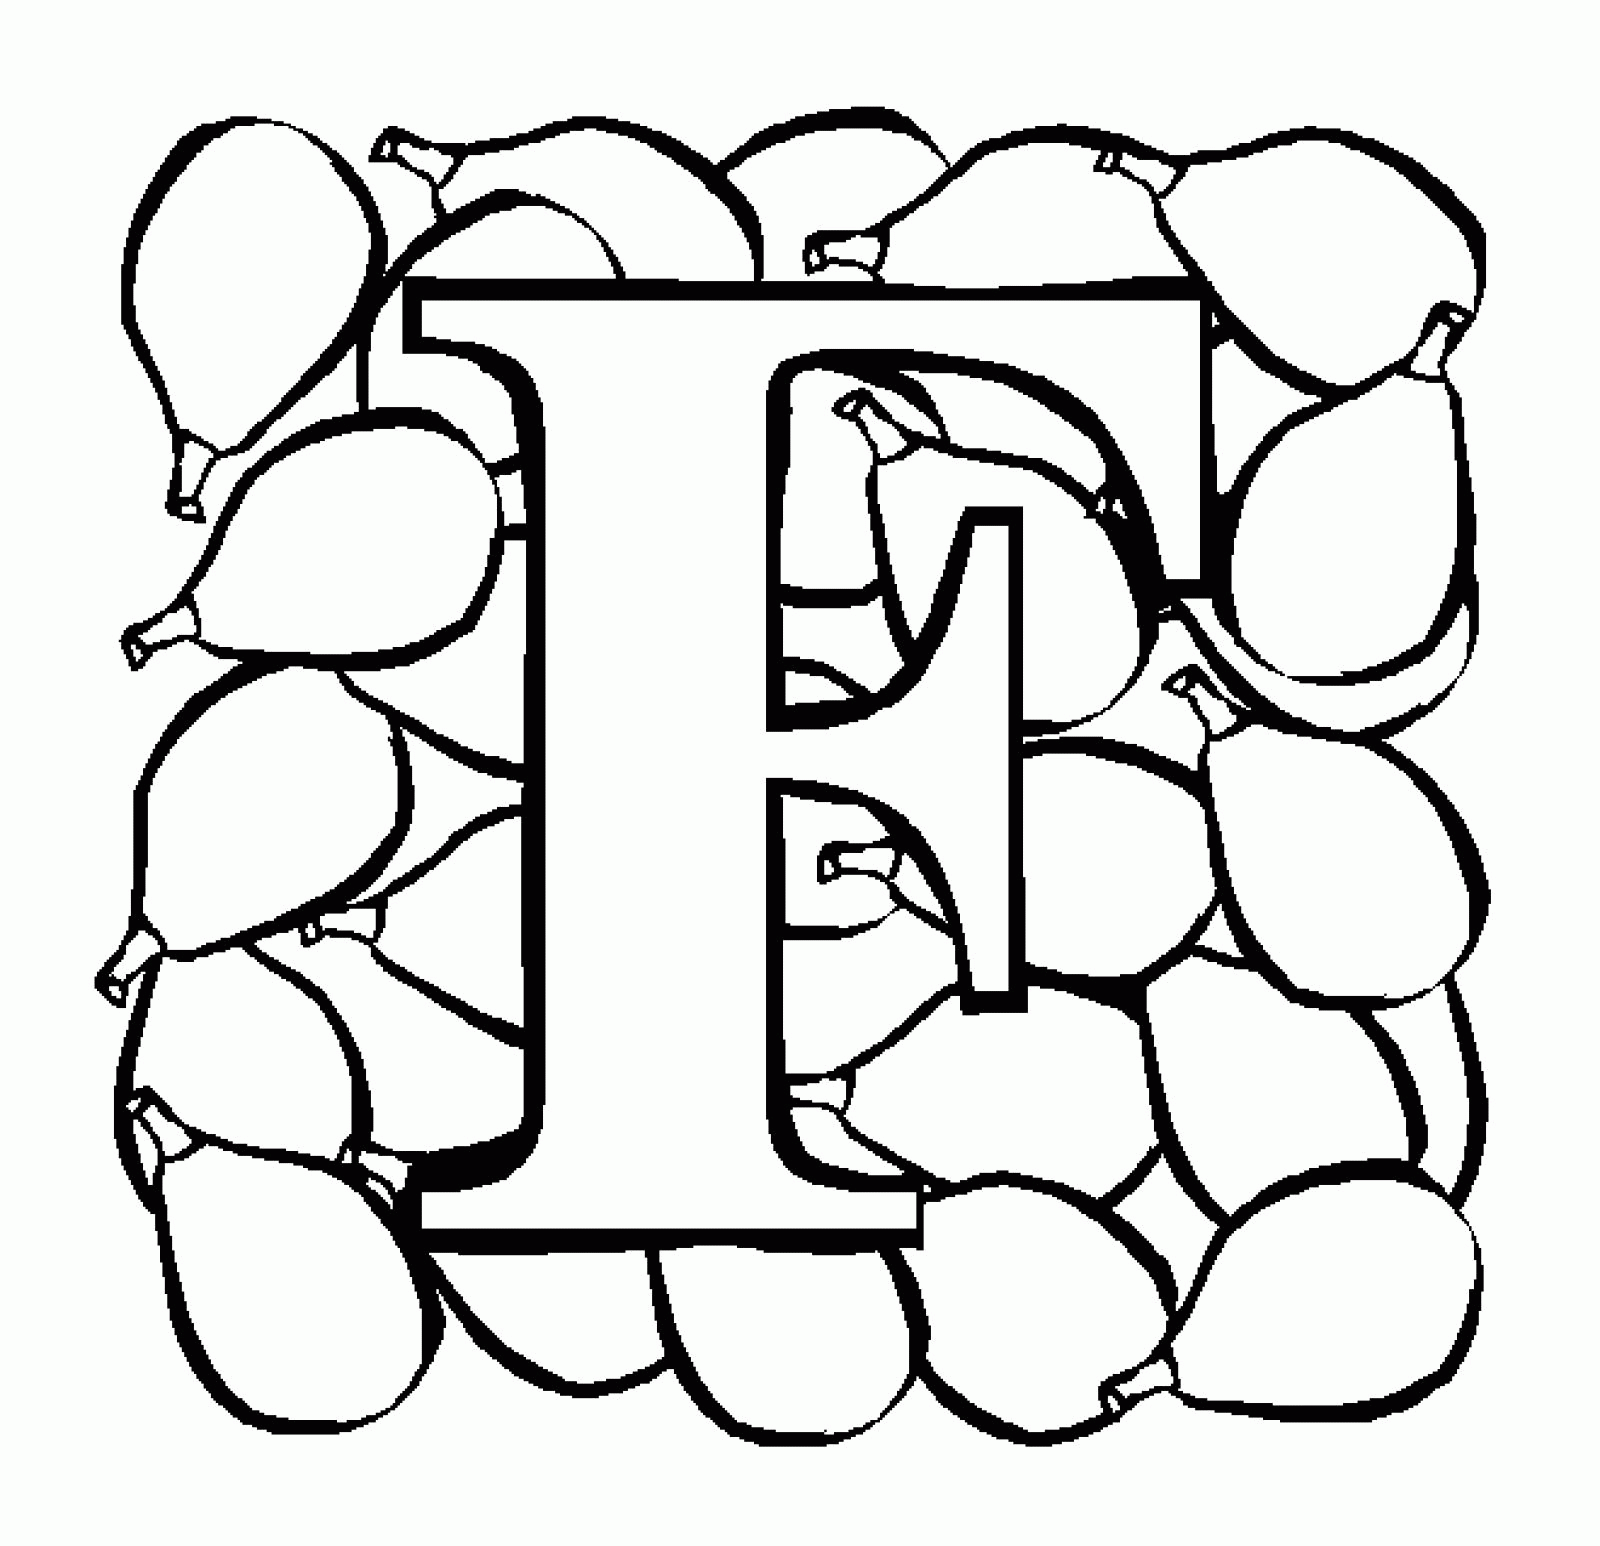  Letter F Coloring Page for Kids